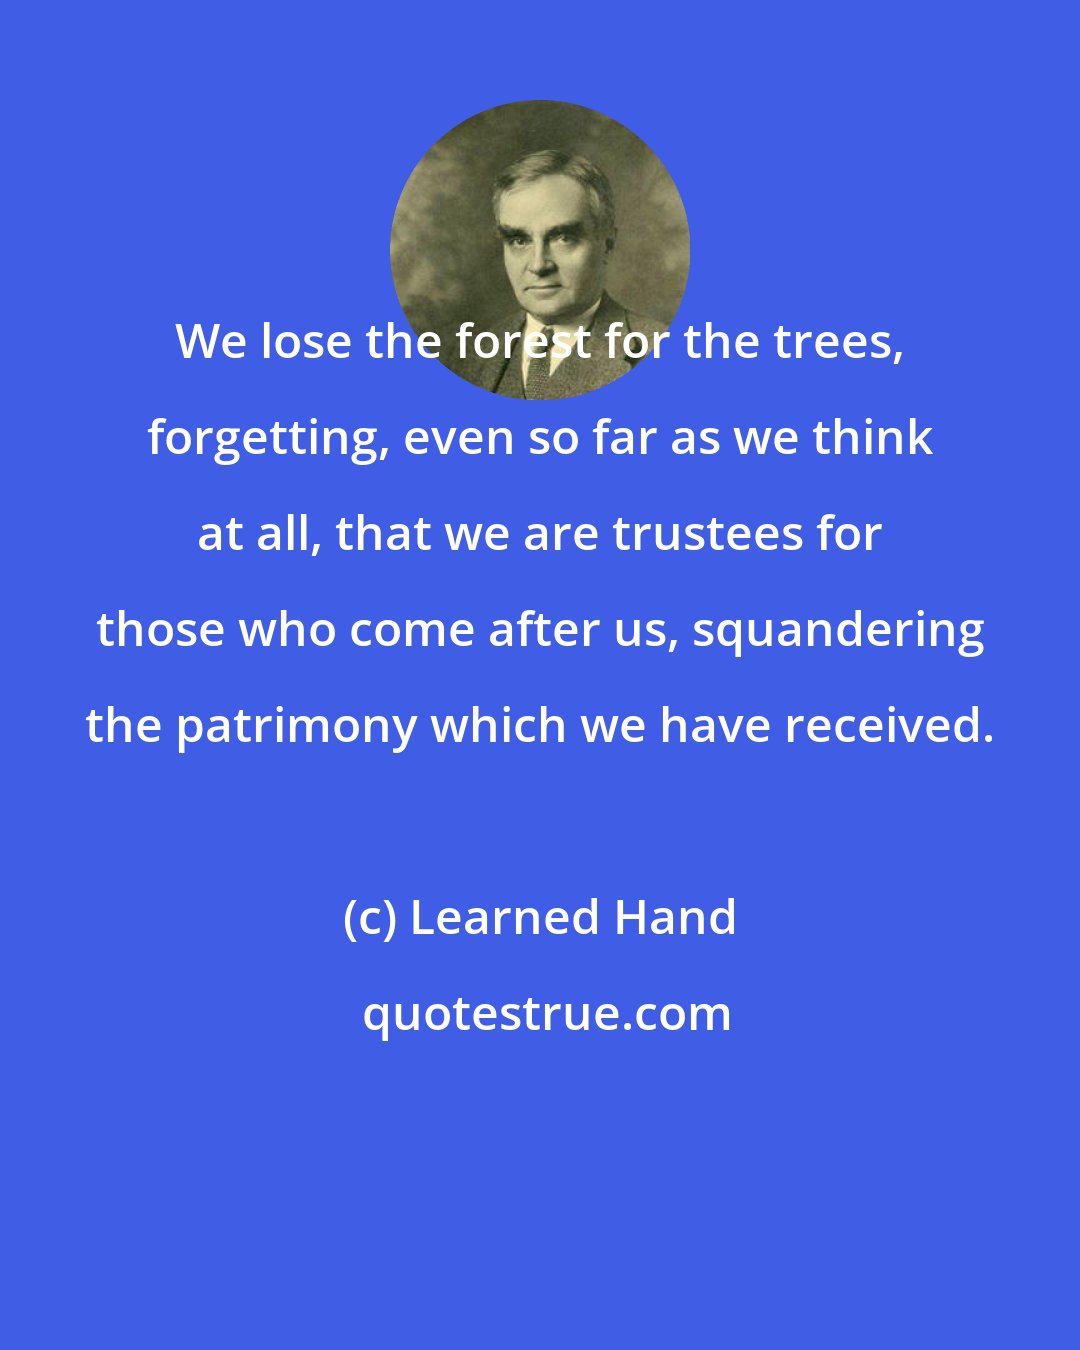 Learned Hand: We lose the forest for the trees, forgetting, even so far as we think at all, that we are trustees for those who come after us, squandering the patrimony which we have received.